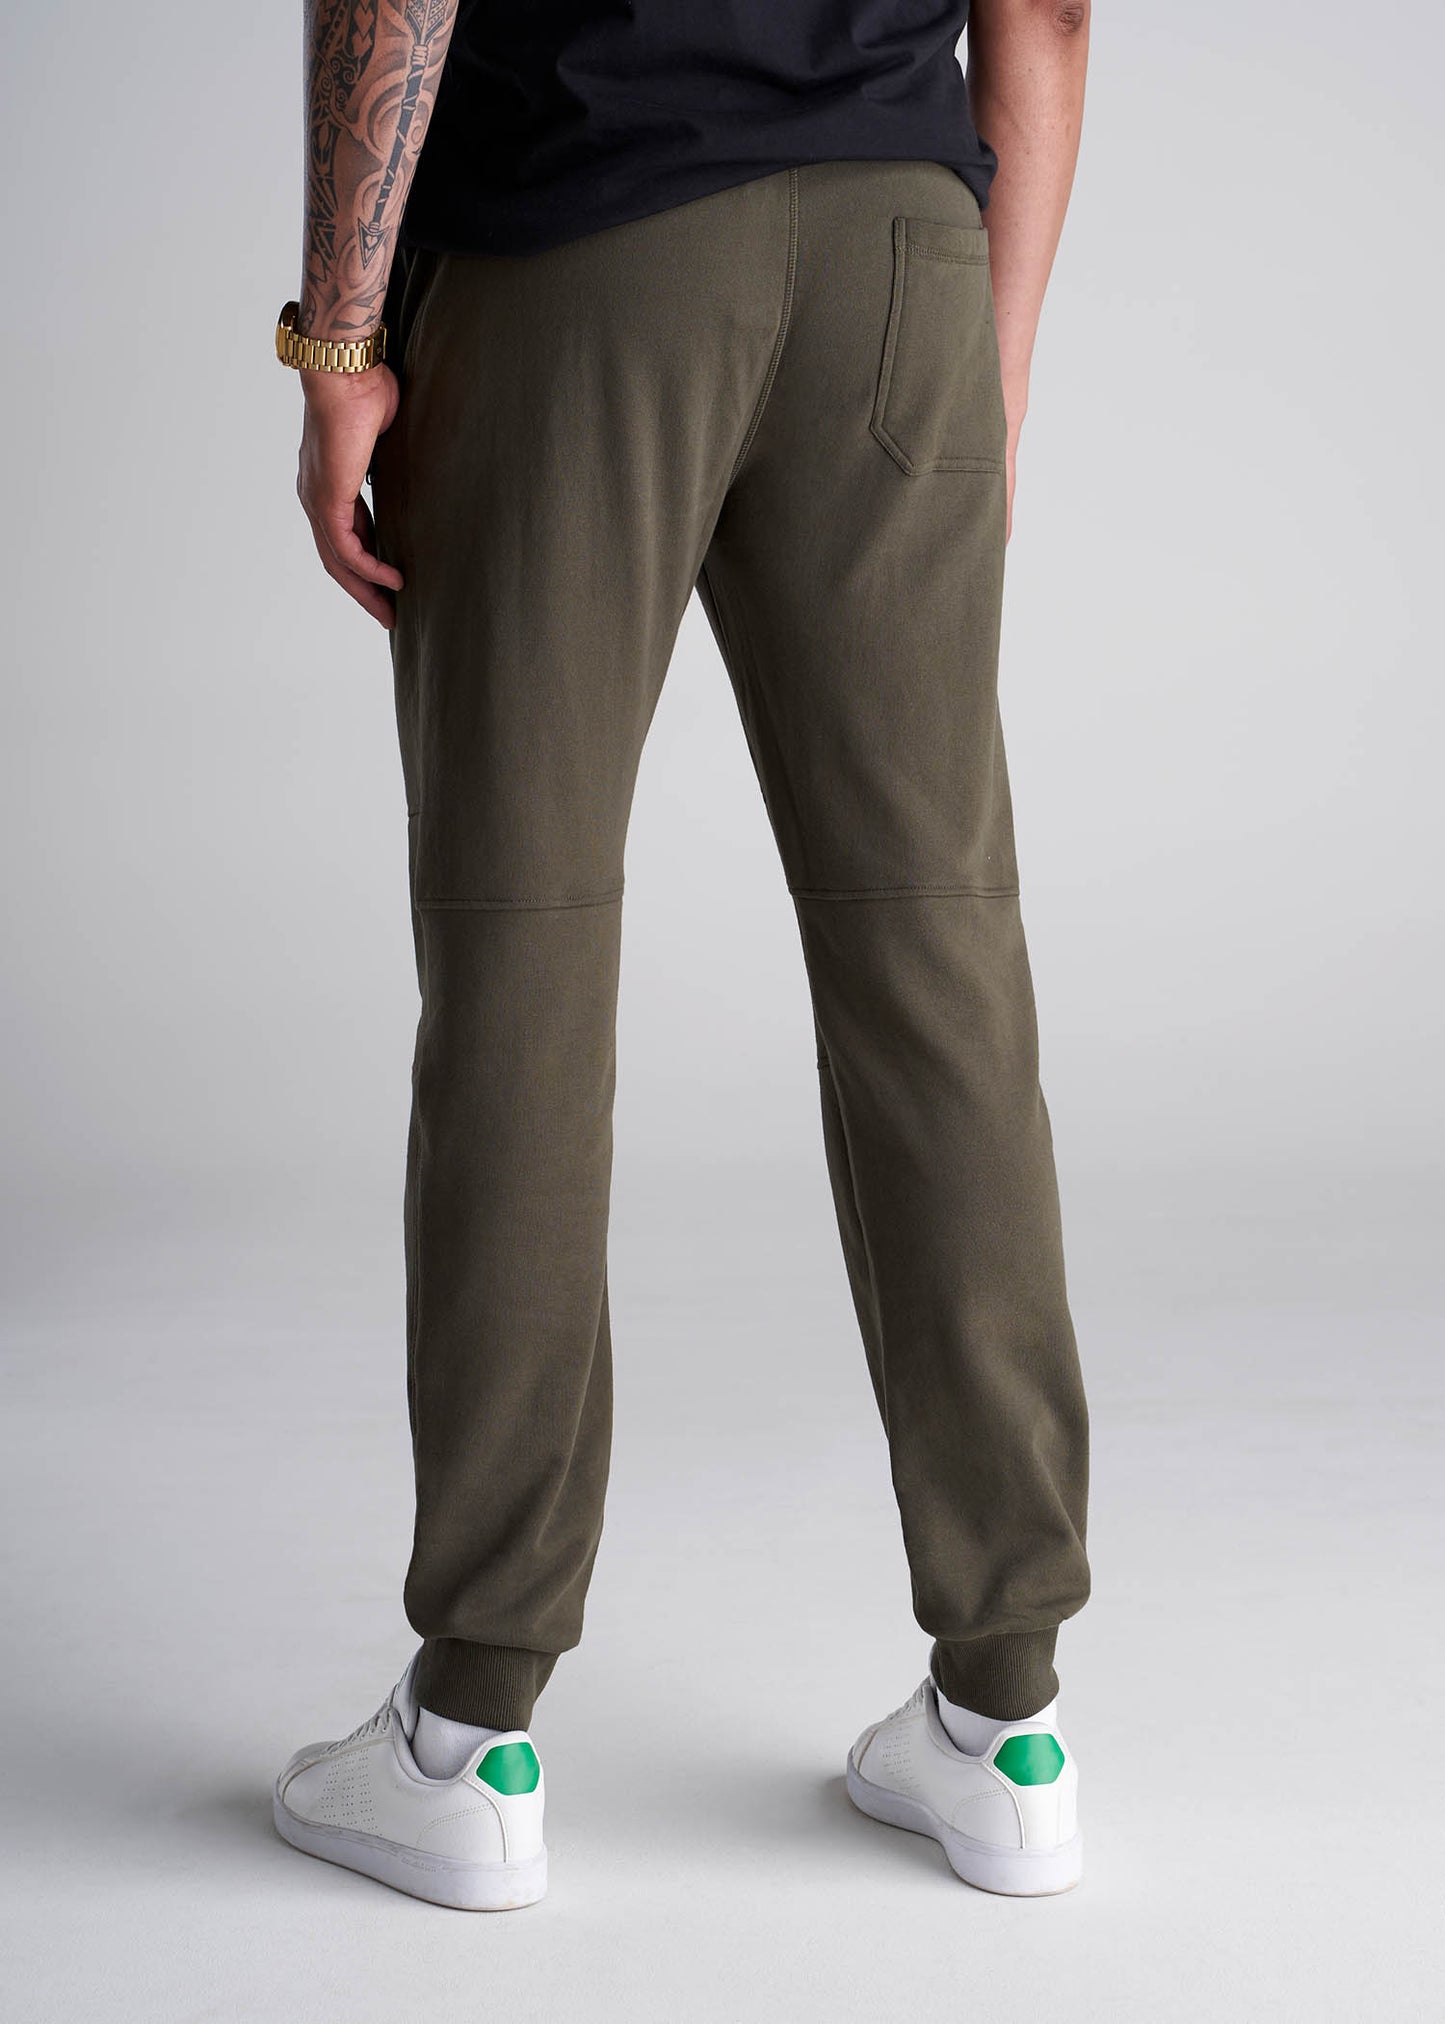 American_Tall_Men_Tall_French_Terry_Zip_Jogger_CamoGreen-Back